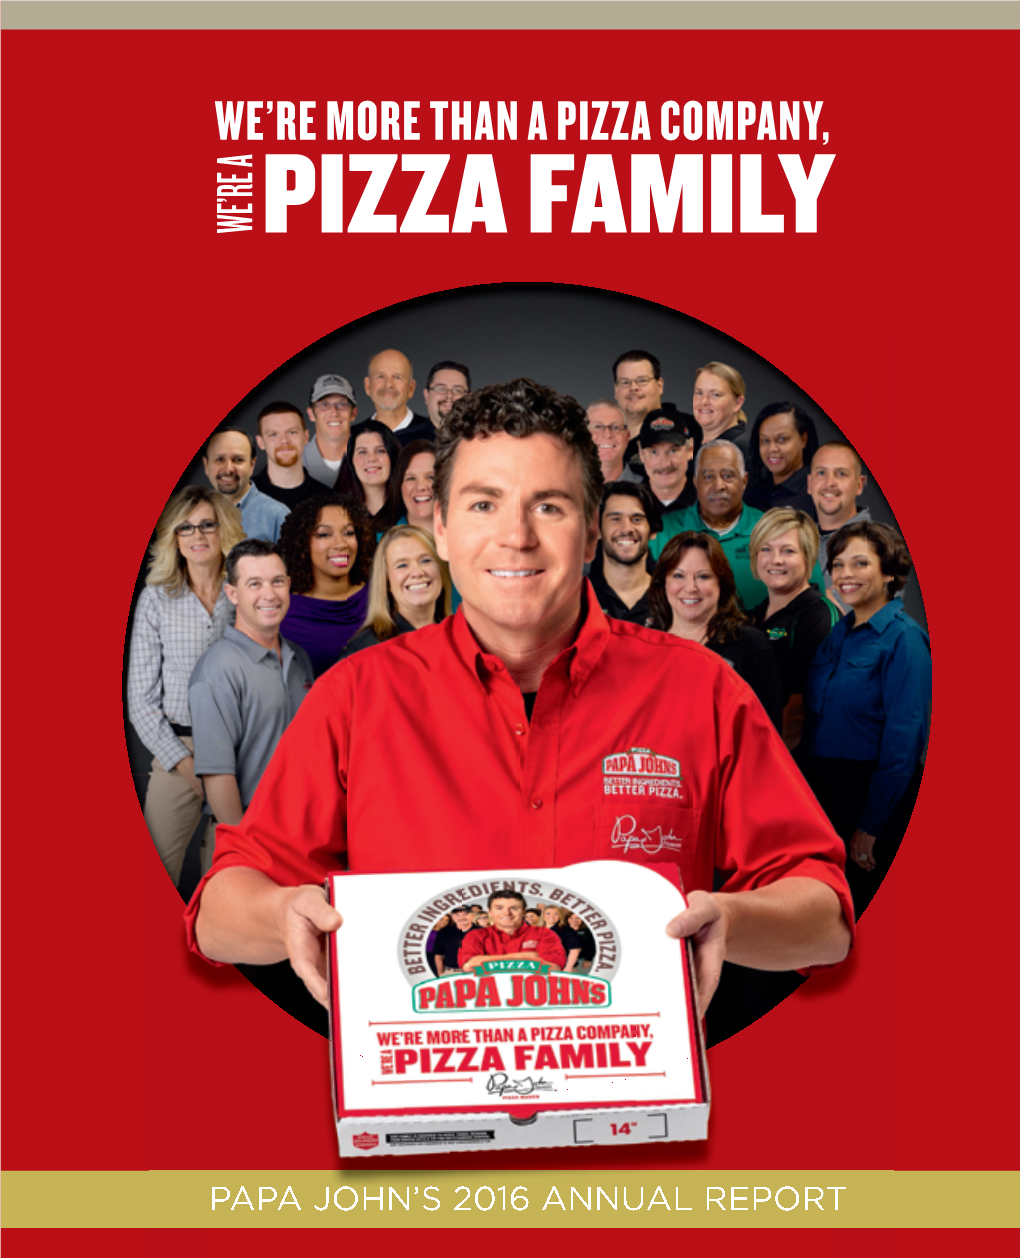 We're More Than a Pizza Company